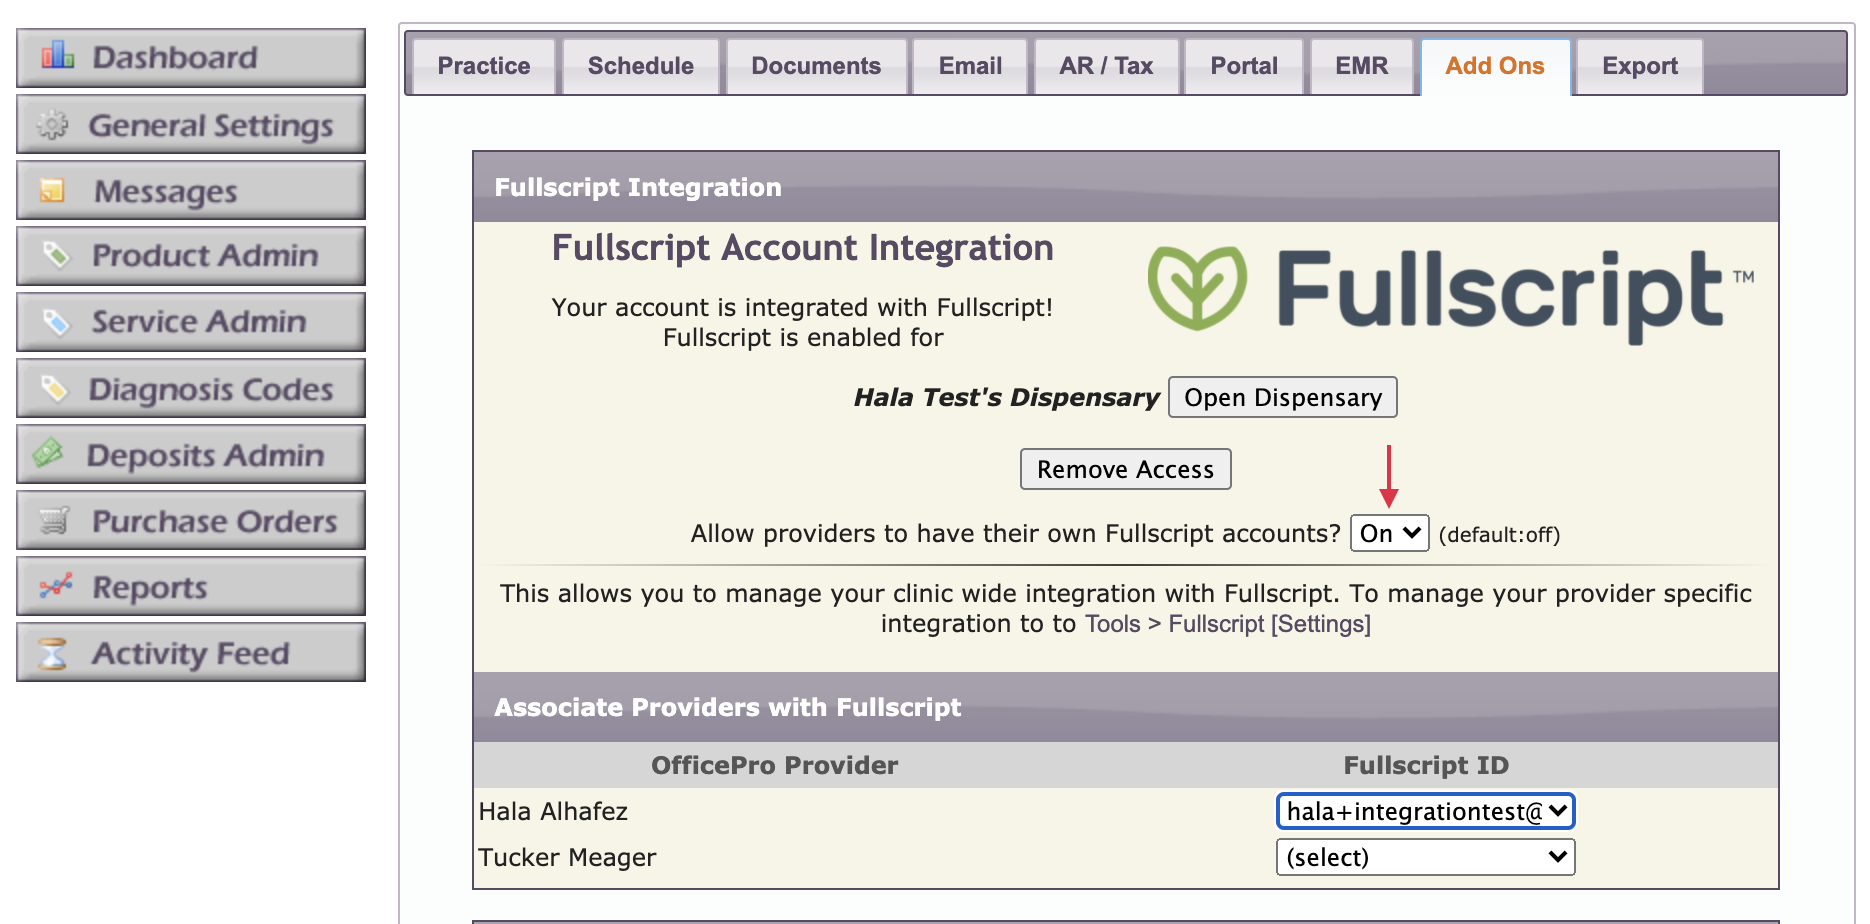 allow providers to have their own fullscript accounts.